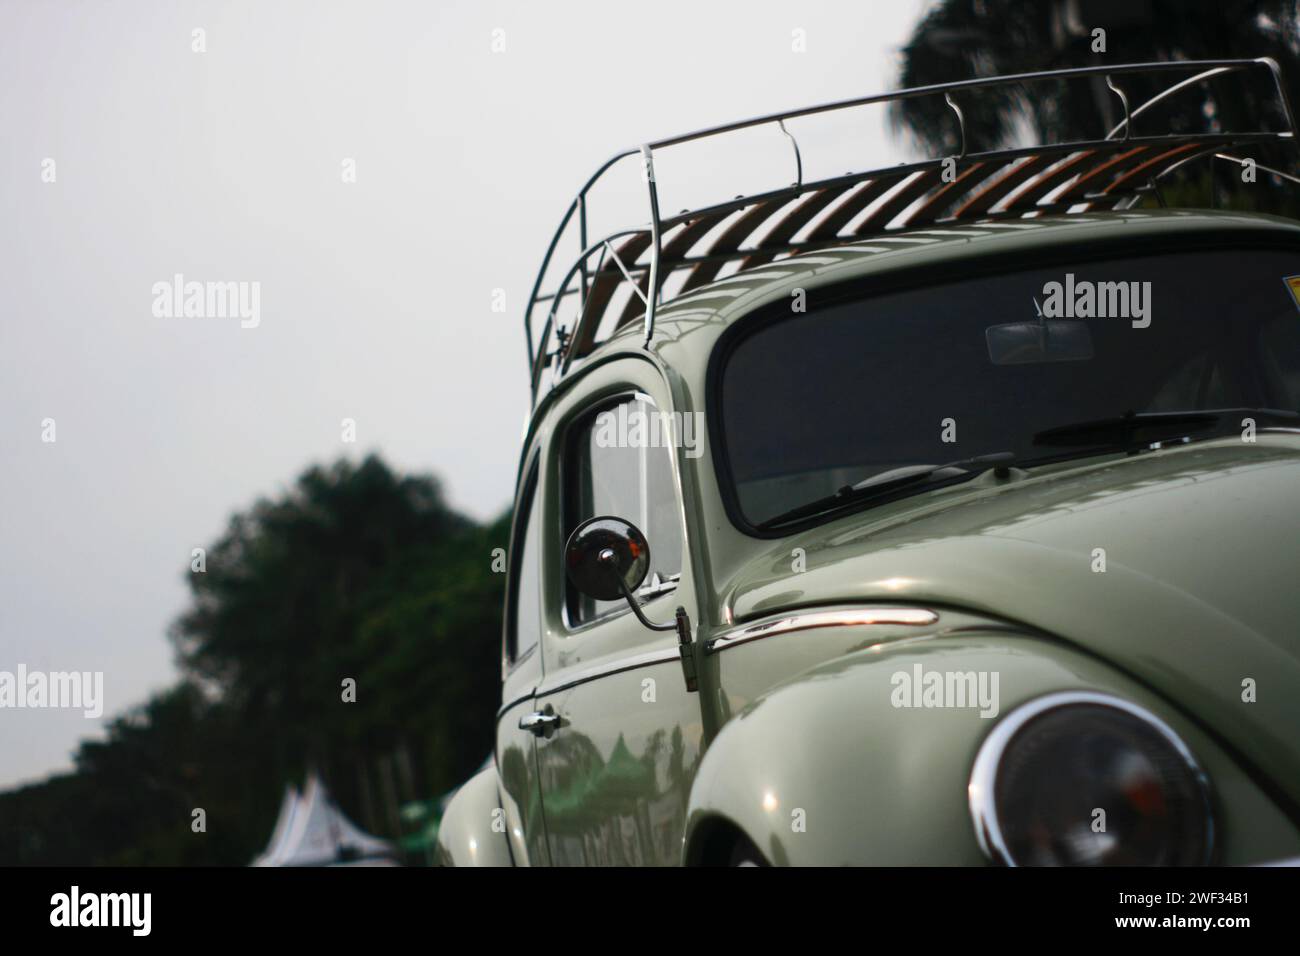 Volkswagen beetle parked in annual VW Indonesia Jambore gathering in Malang, East Java, Indonesia Stock Photo